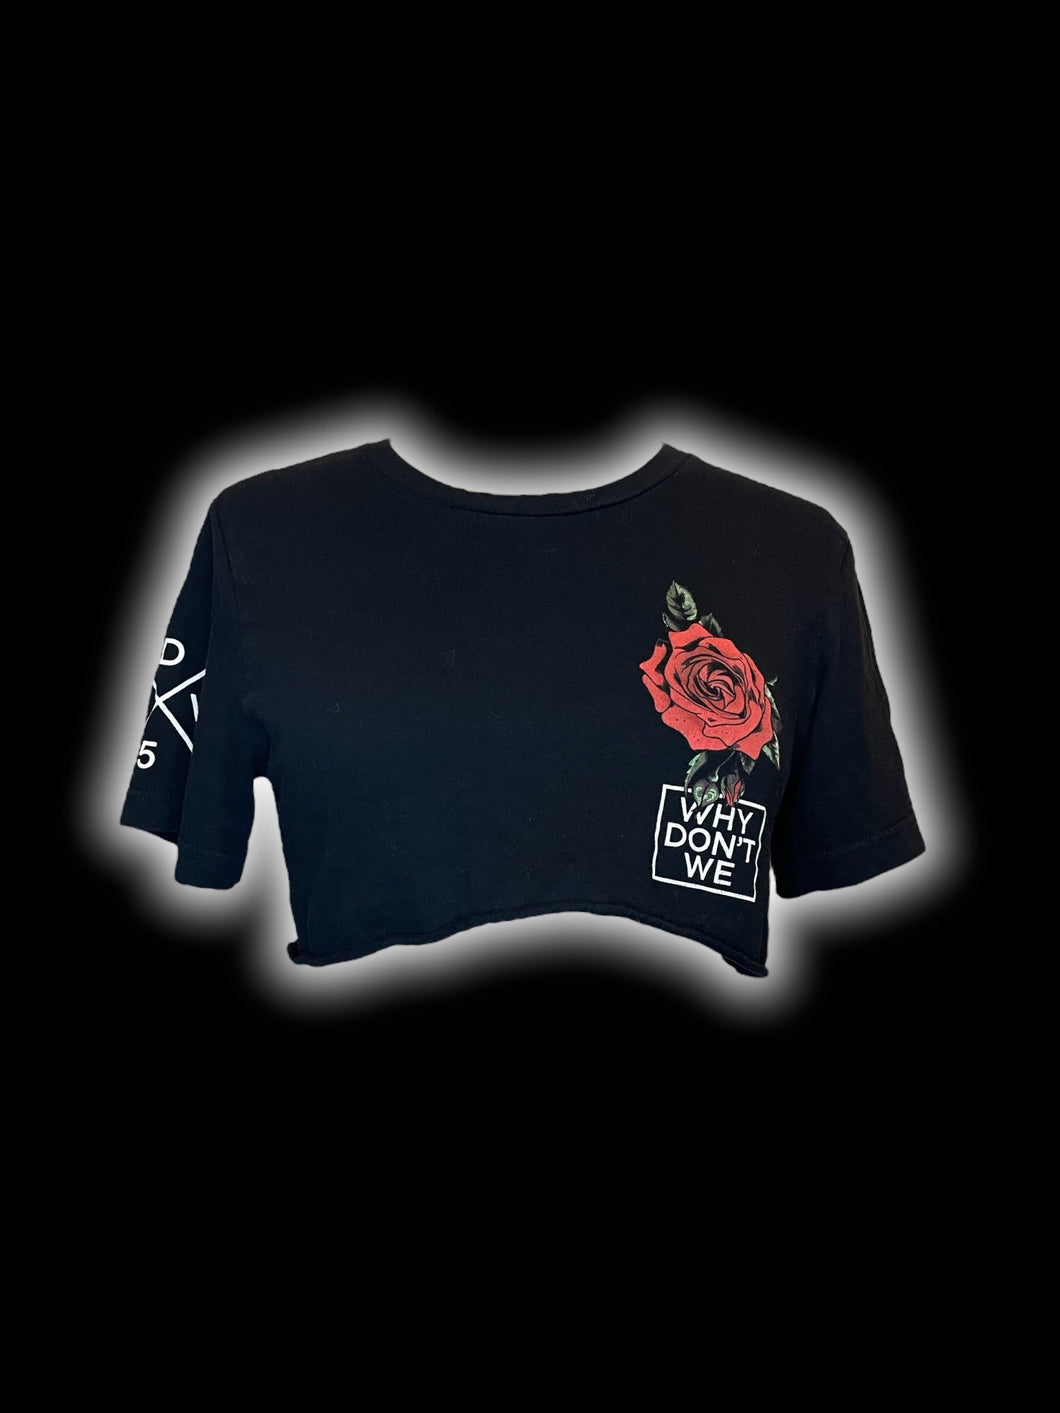 M Black cotton short sleeve crew neck super crop top w/ red, green, & white rose & “Why Don’t We” graphics